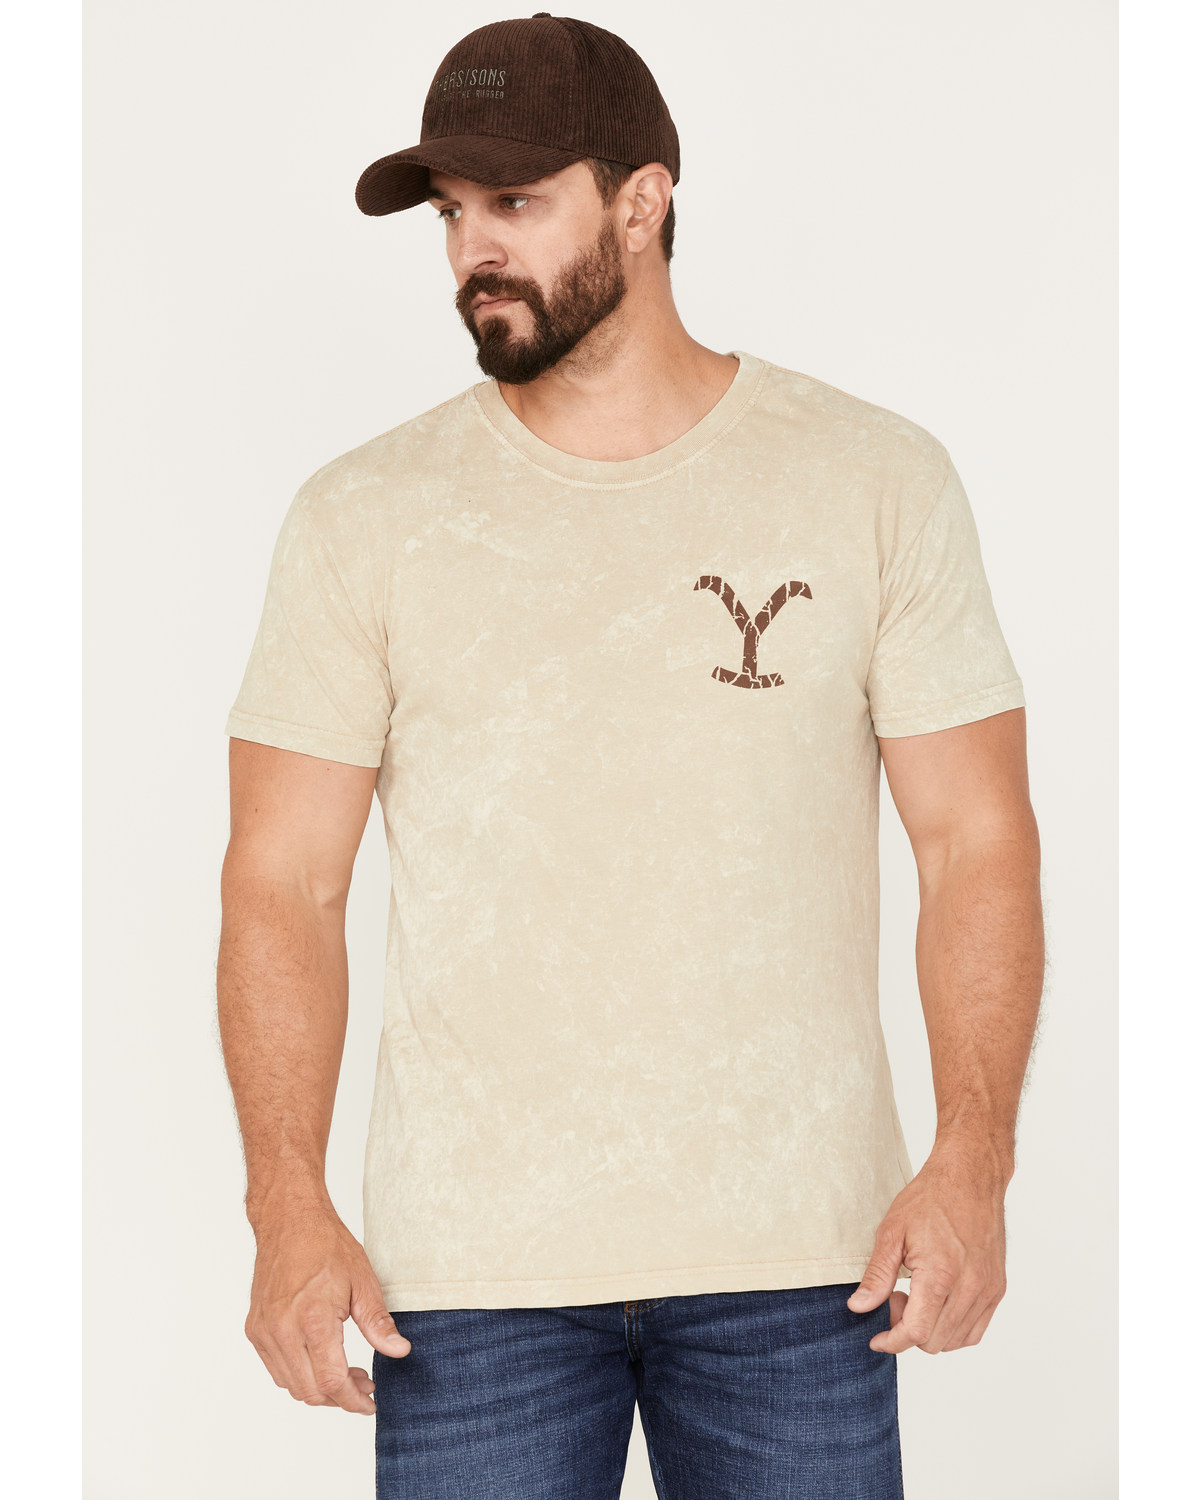 Changes Men's Yellowstone Ranch Hand Graphic T-Shirt